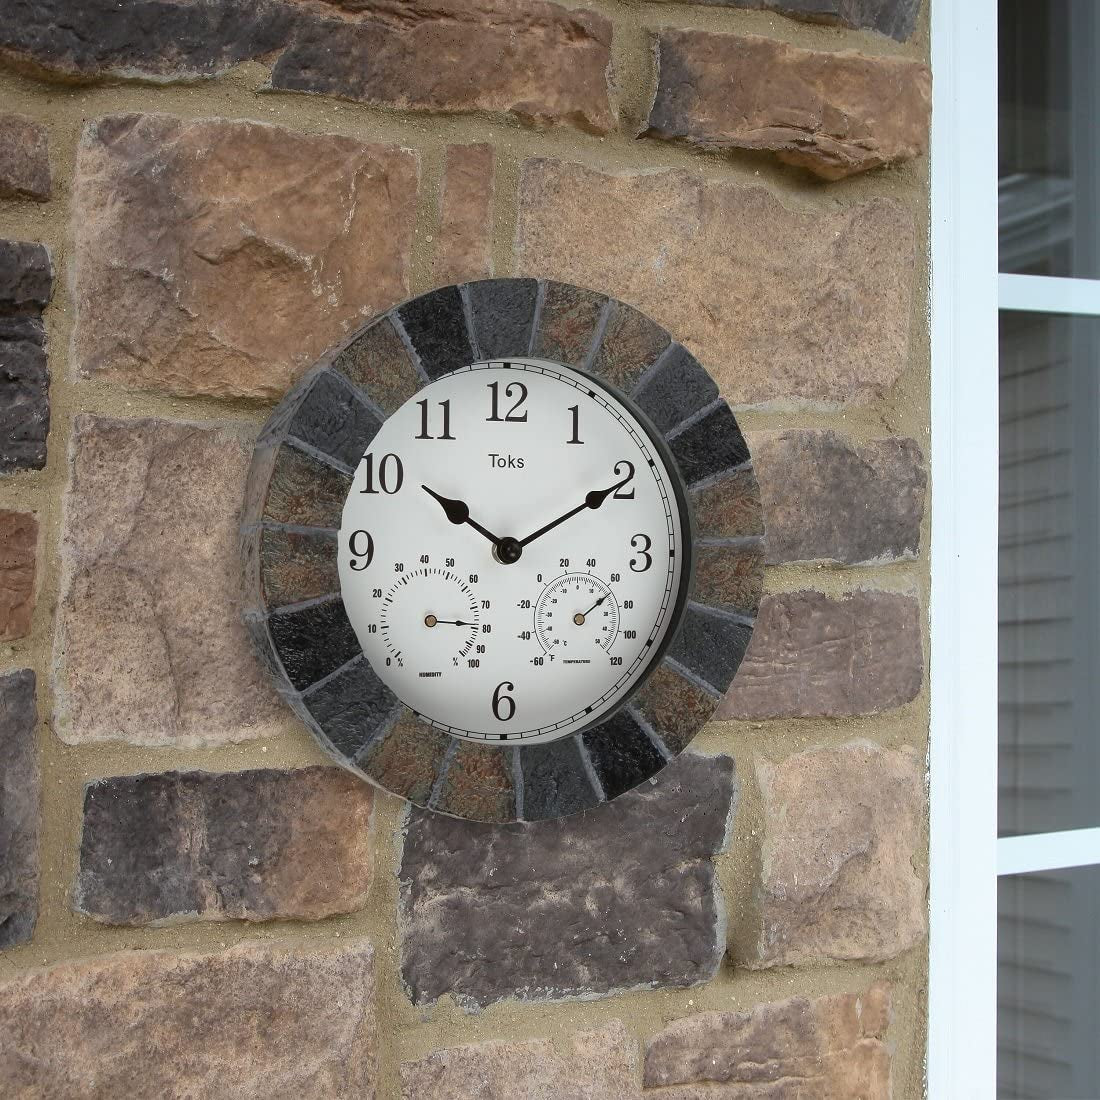 Lily's Home, Lily'S Home Hanging Wall Clock, Includes a Thermometer and Hygrometer and Is Ideal for Indoor and Outdoor Use, Faux-Slate (10 Inches)